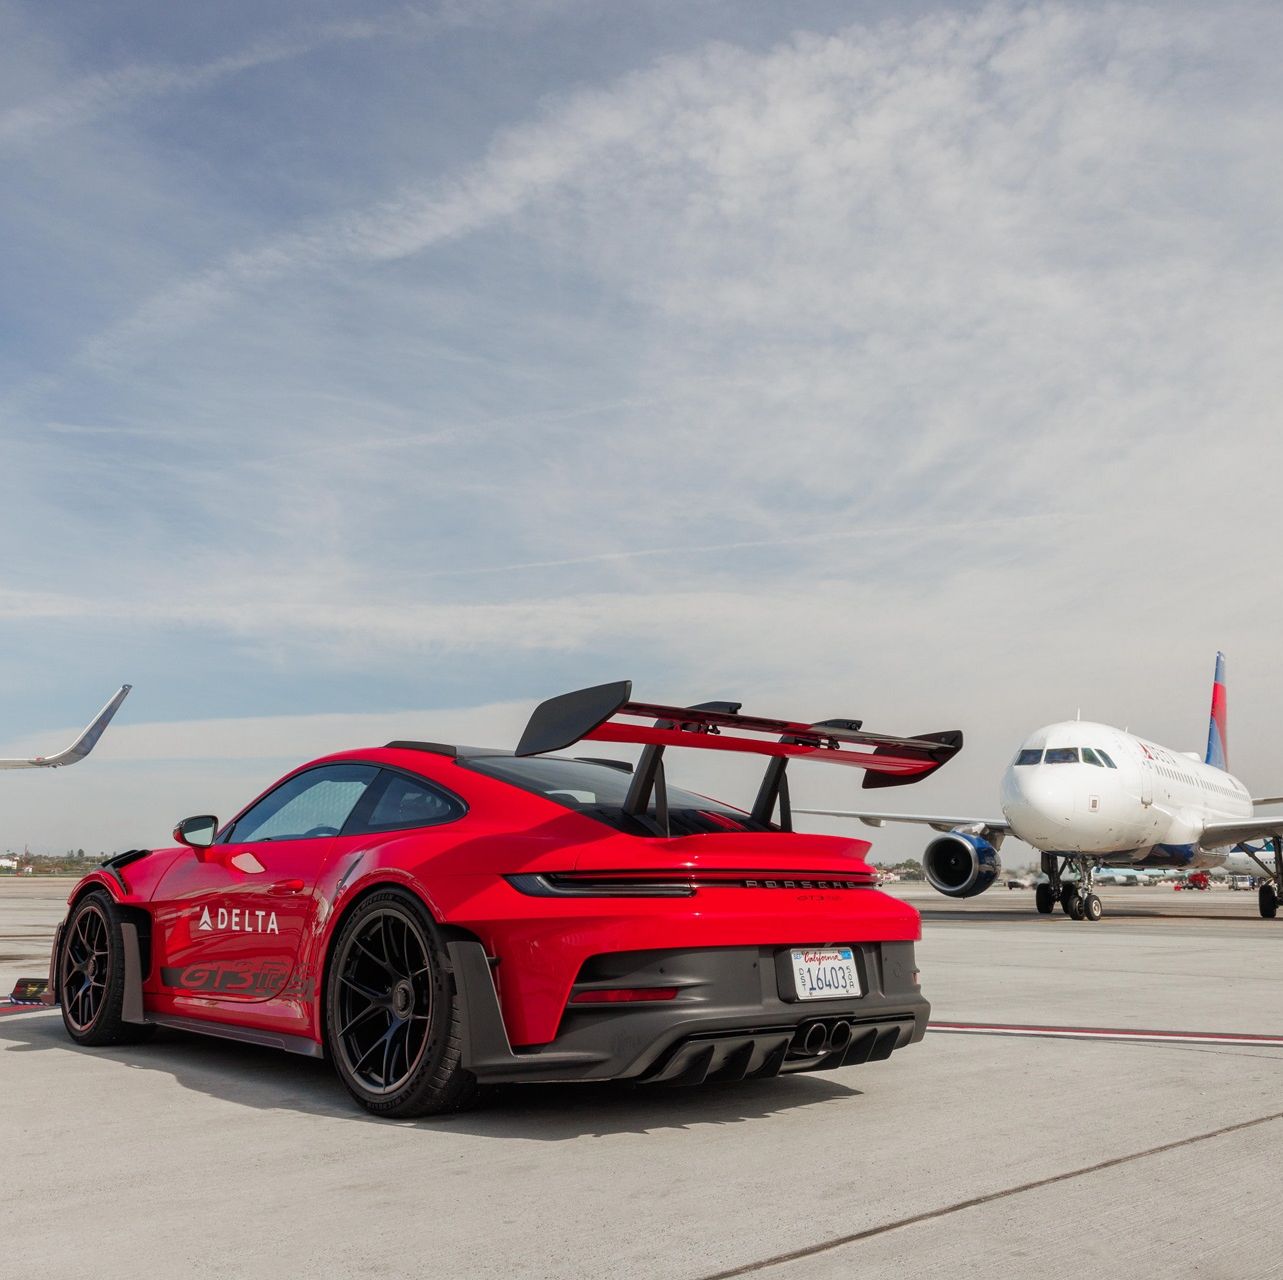 Delta Is Surprising Flyers with Flight Transfers in a Porsche 911 GT3 RS at LAX